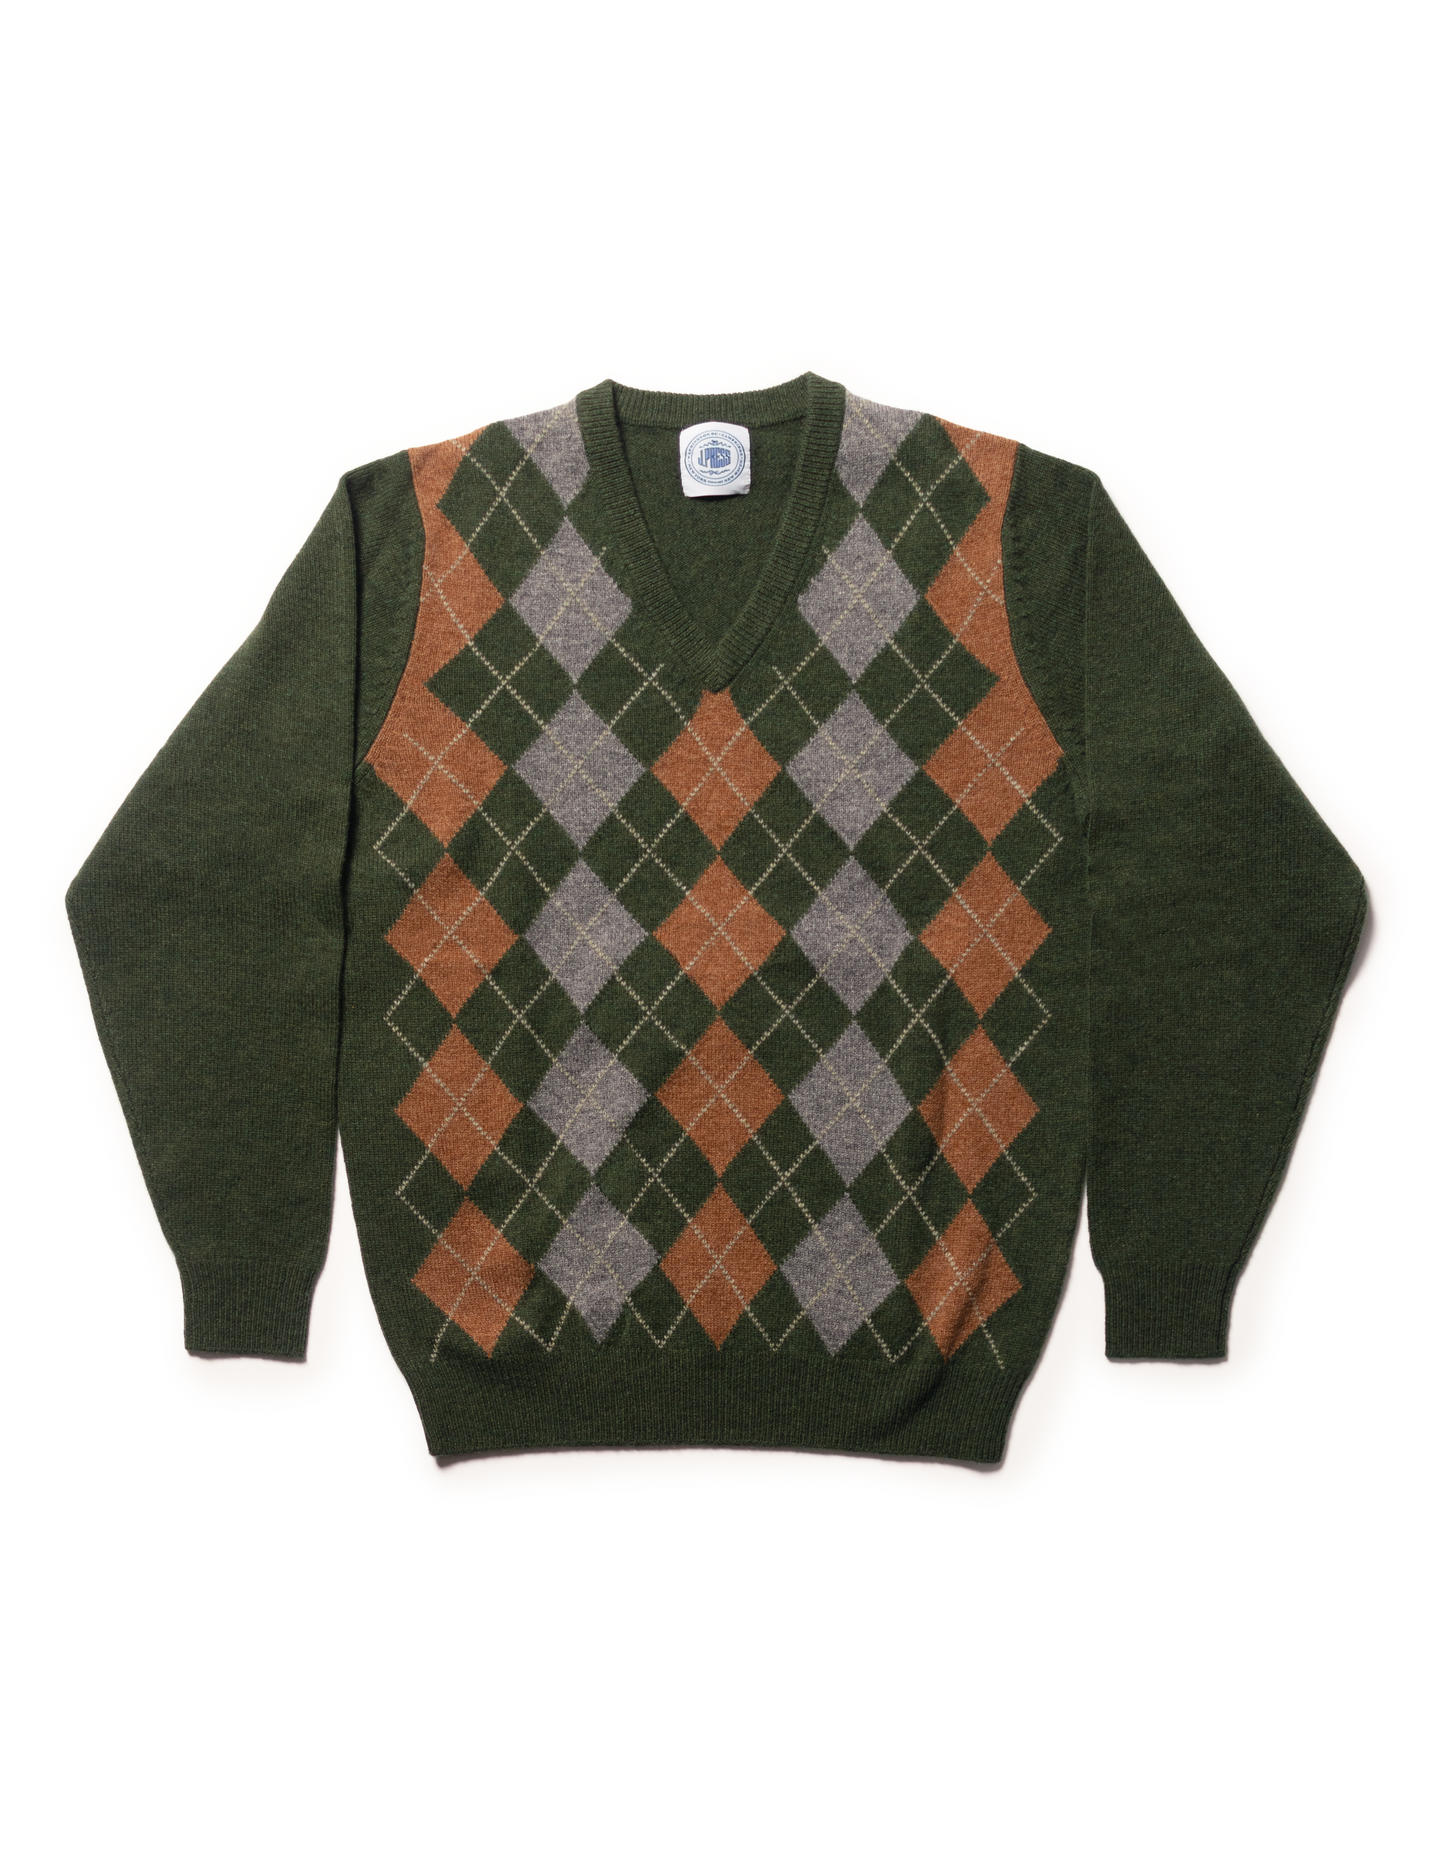 LAMBSWOOL ARGYLE V NECK SWEATER - GREEN/BROWN